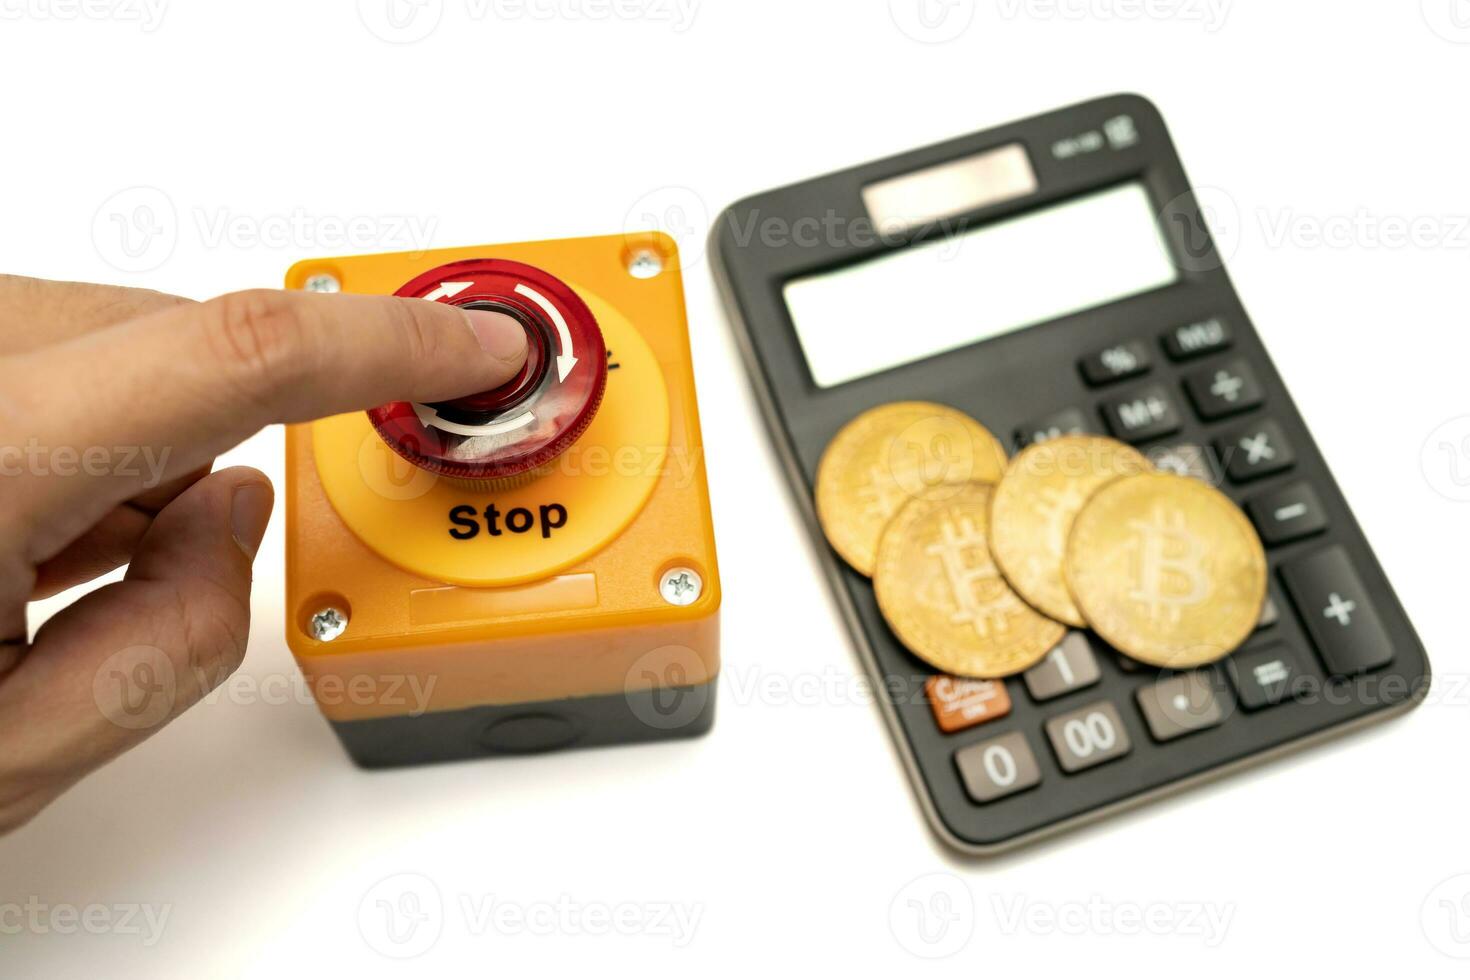 calculator bitcoin and stop button isolated on white background, calculation of profitability. financial disaster and crisis protection when market price fall. photo